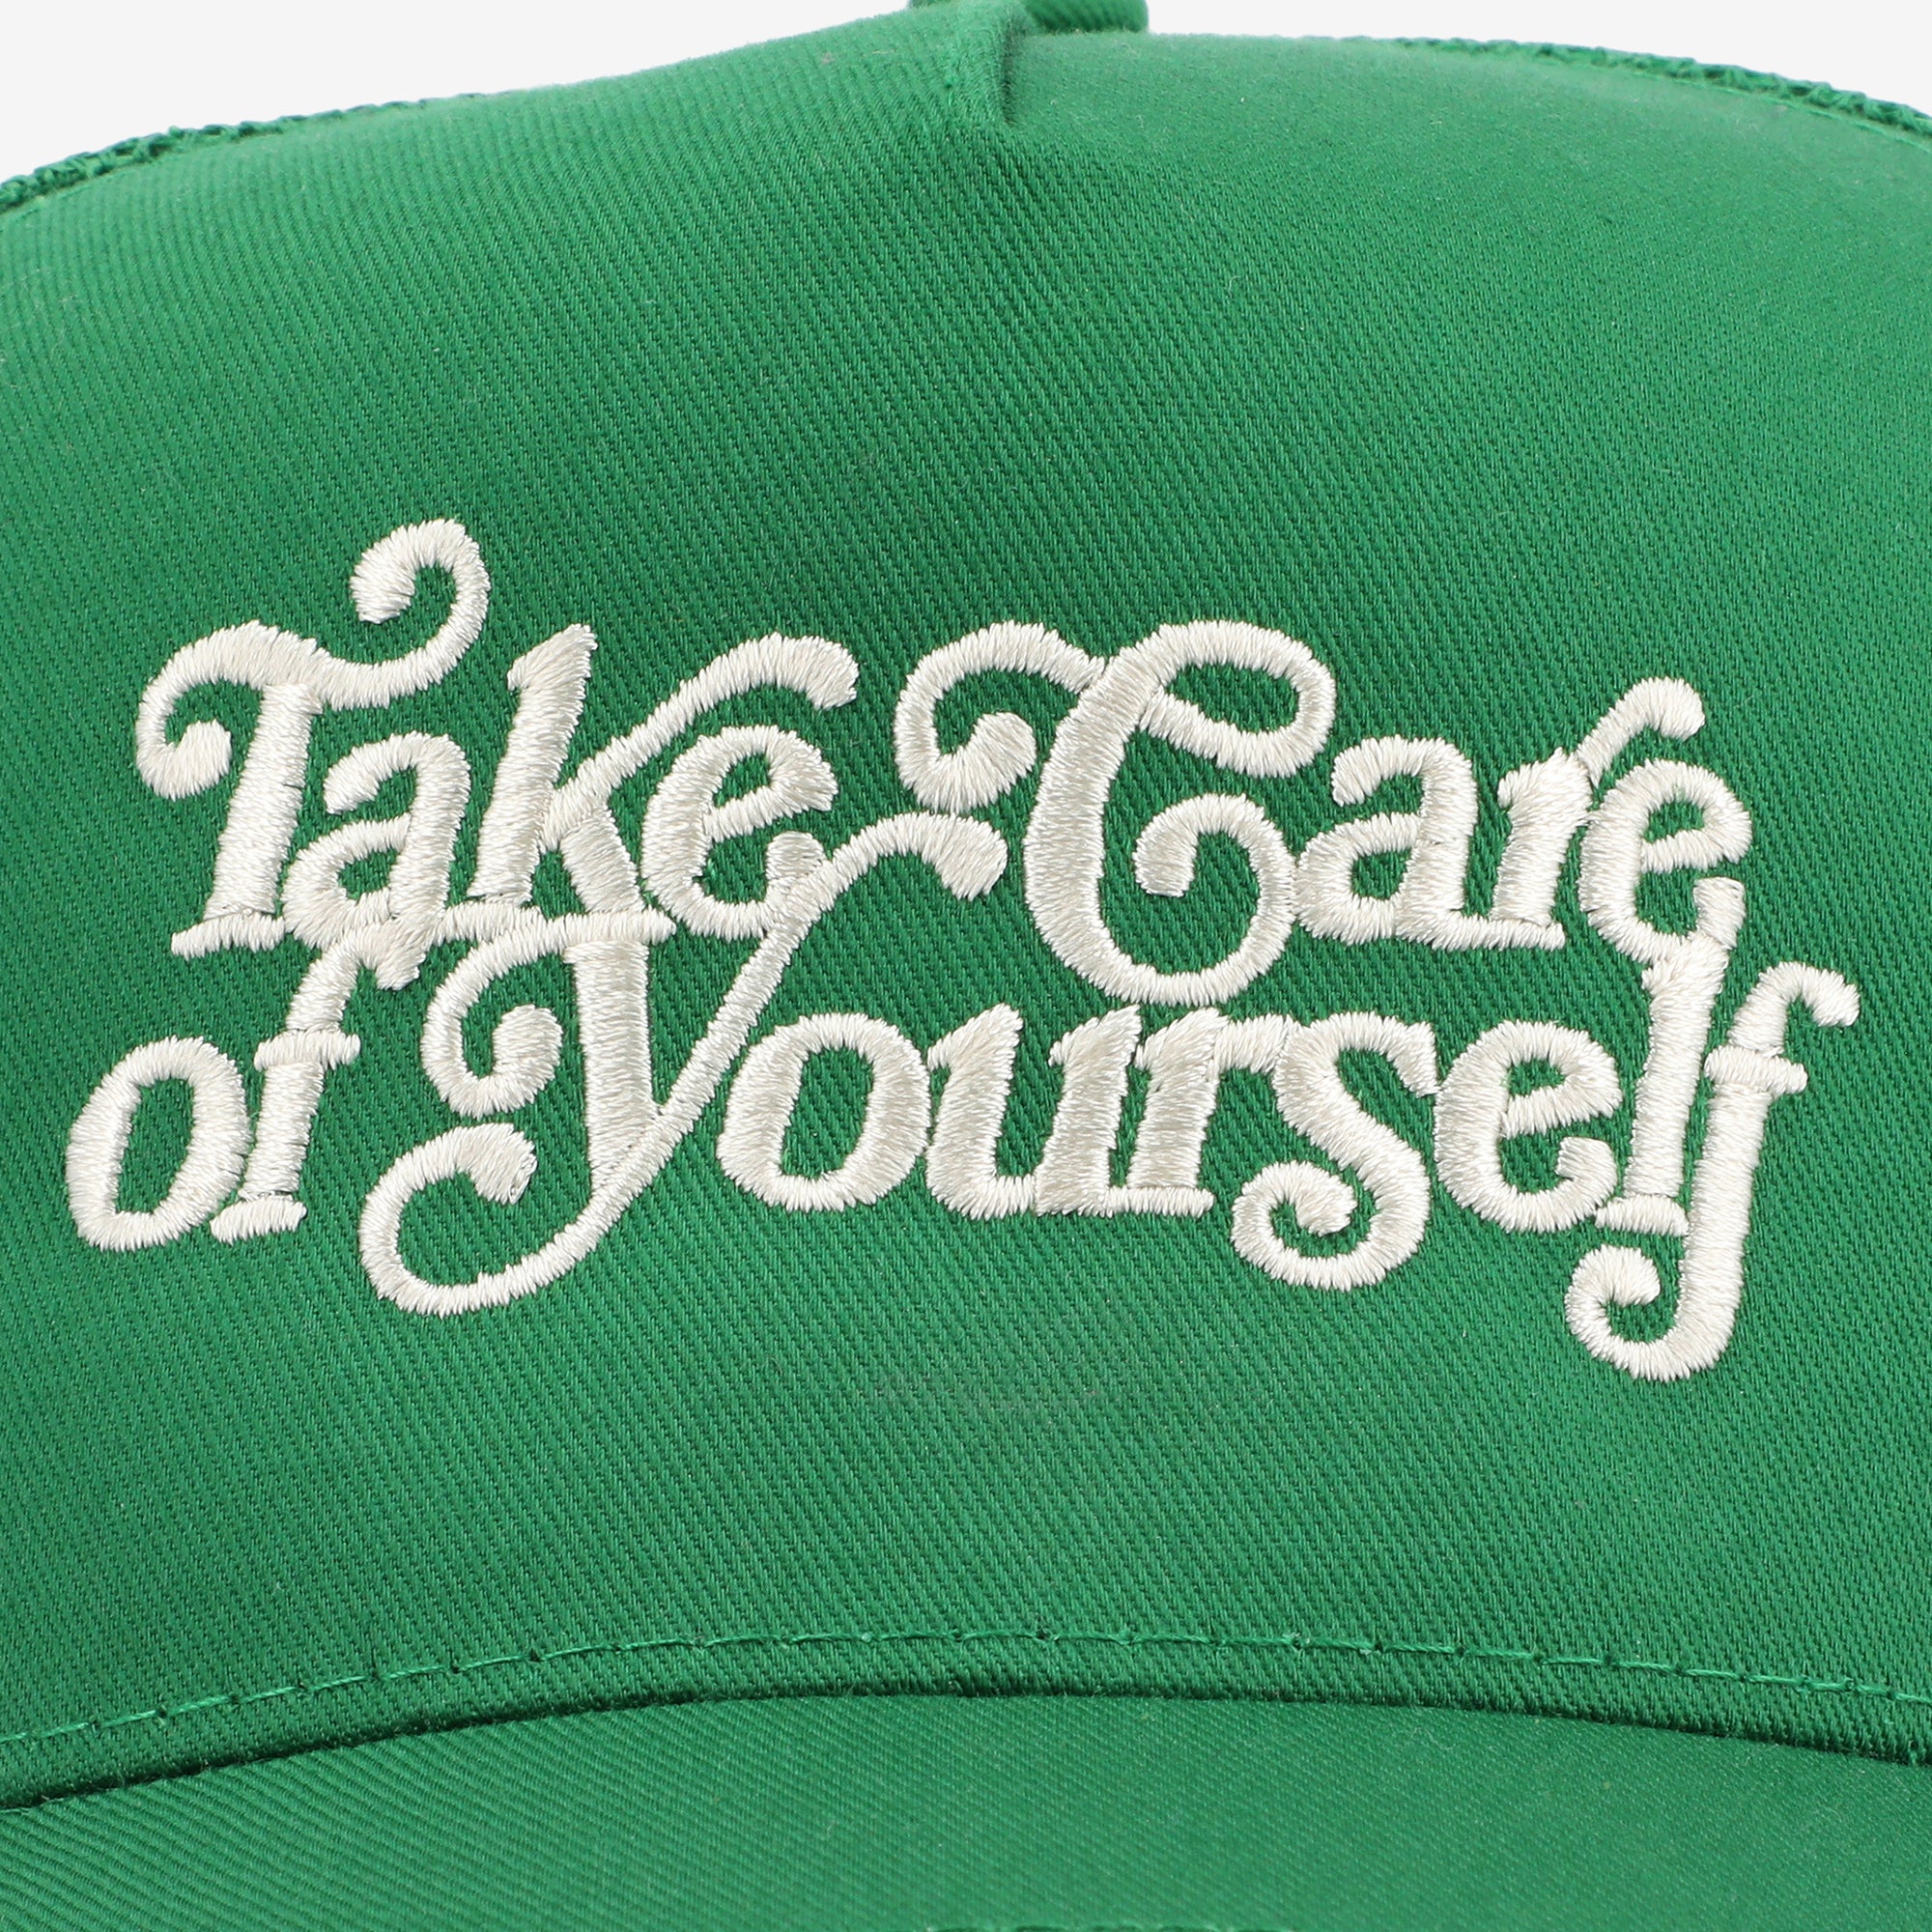 Take Care Hat in Kelly Green